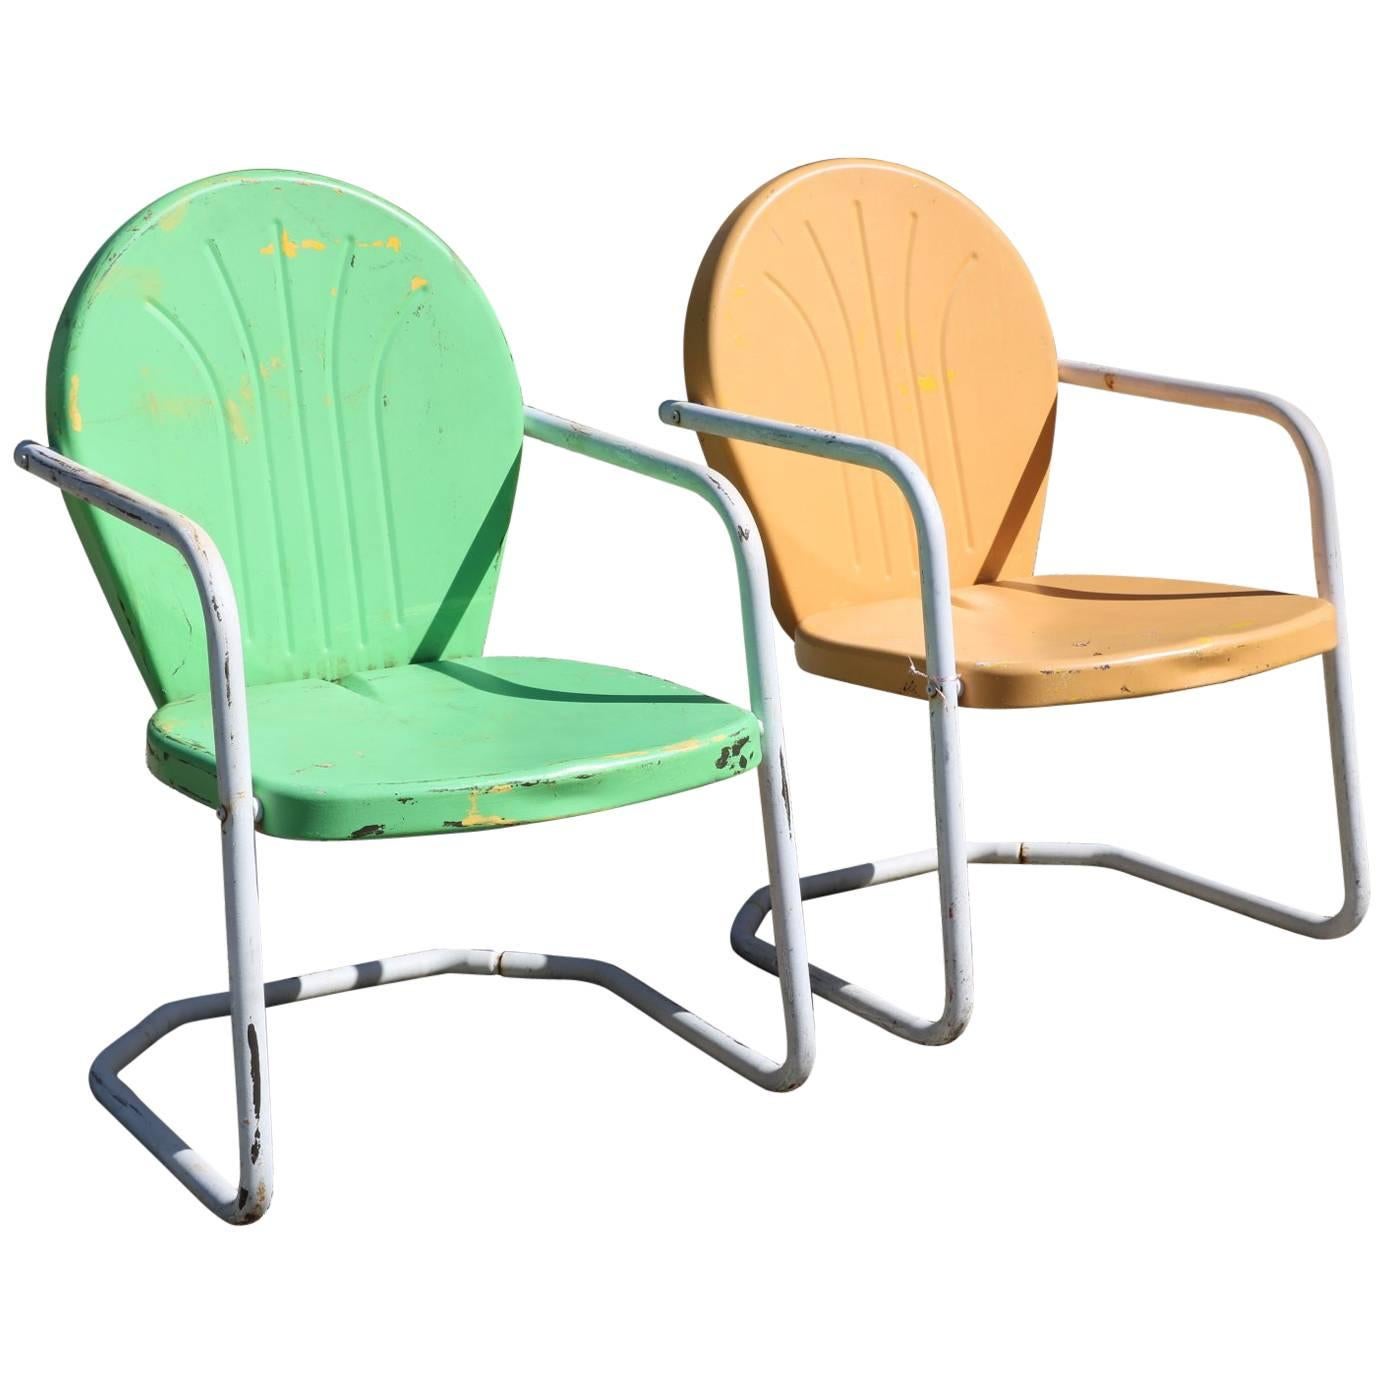 Summertime! Tangerine and Lime Green Retro Rockers Vintage 1950s Outdoor Chairs